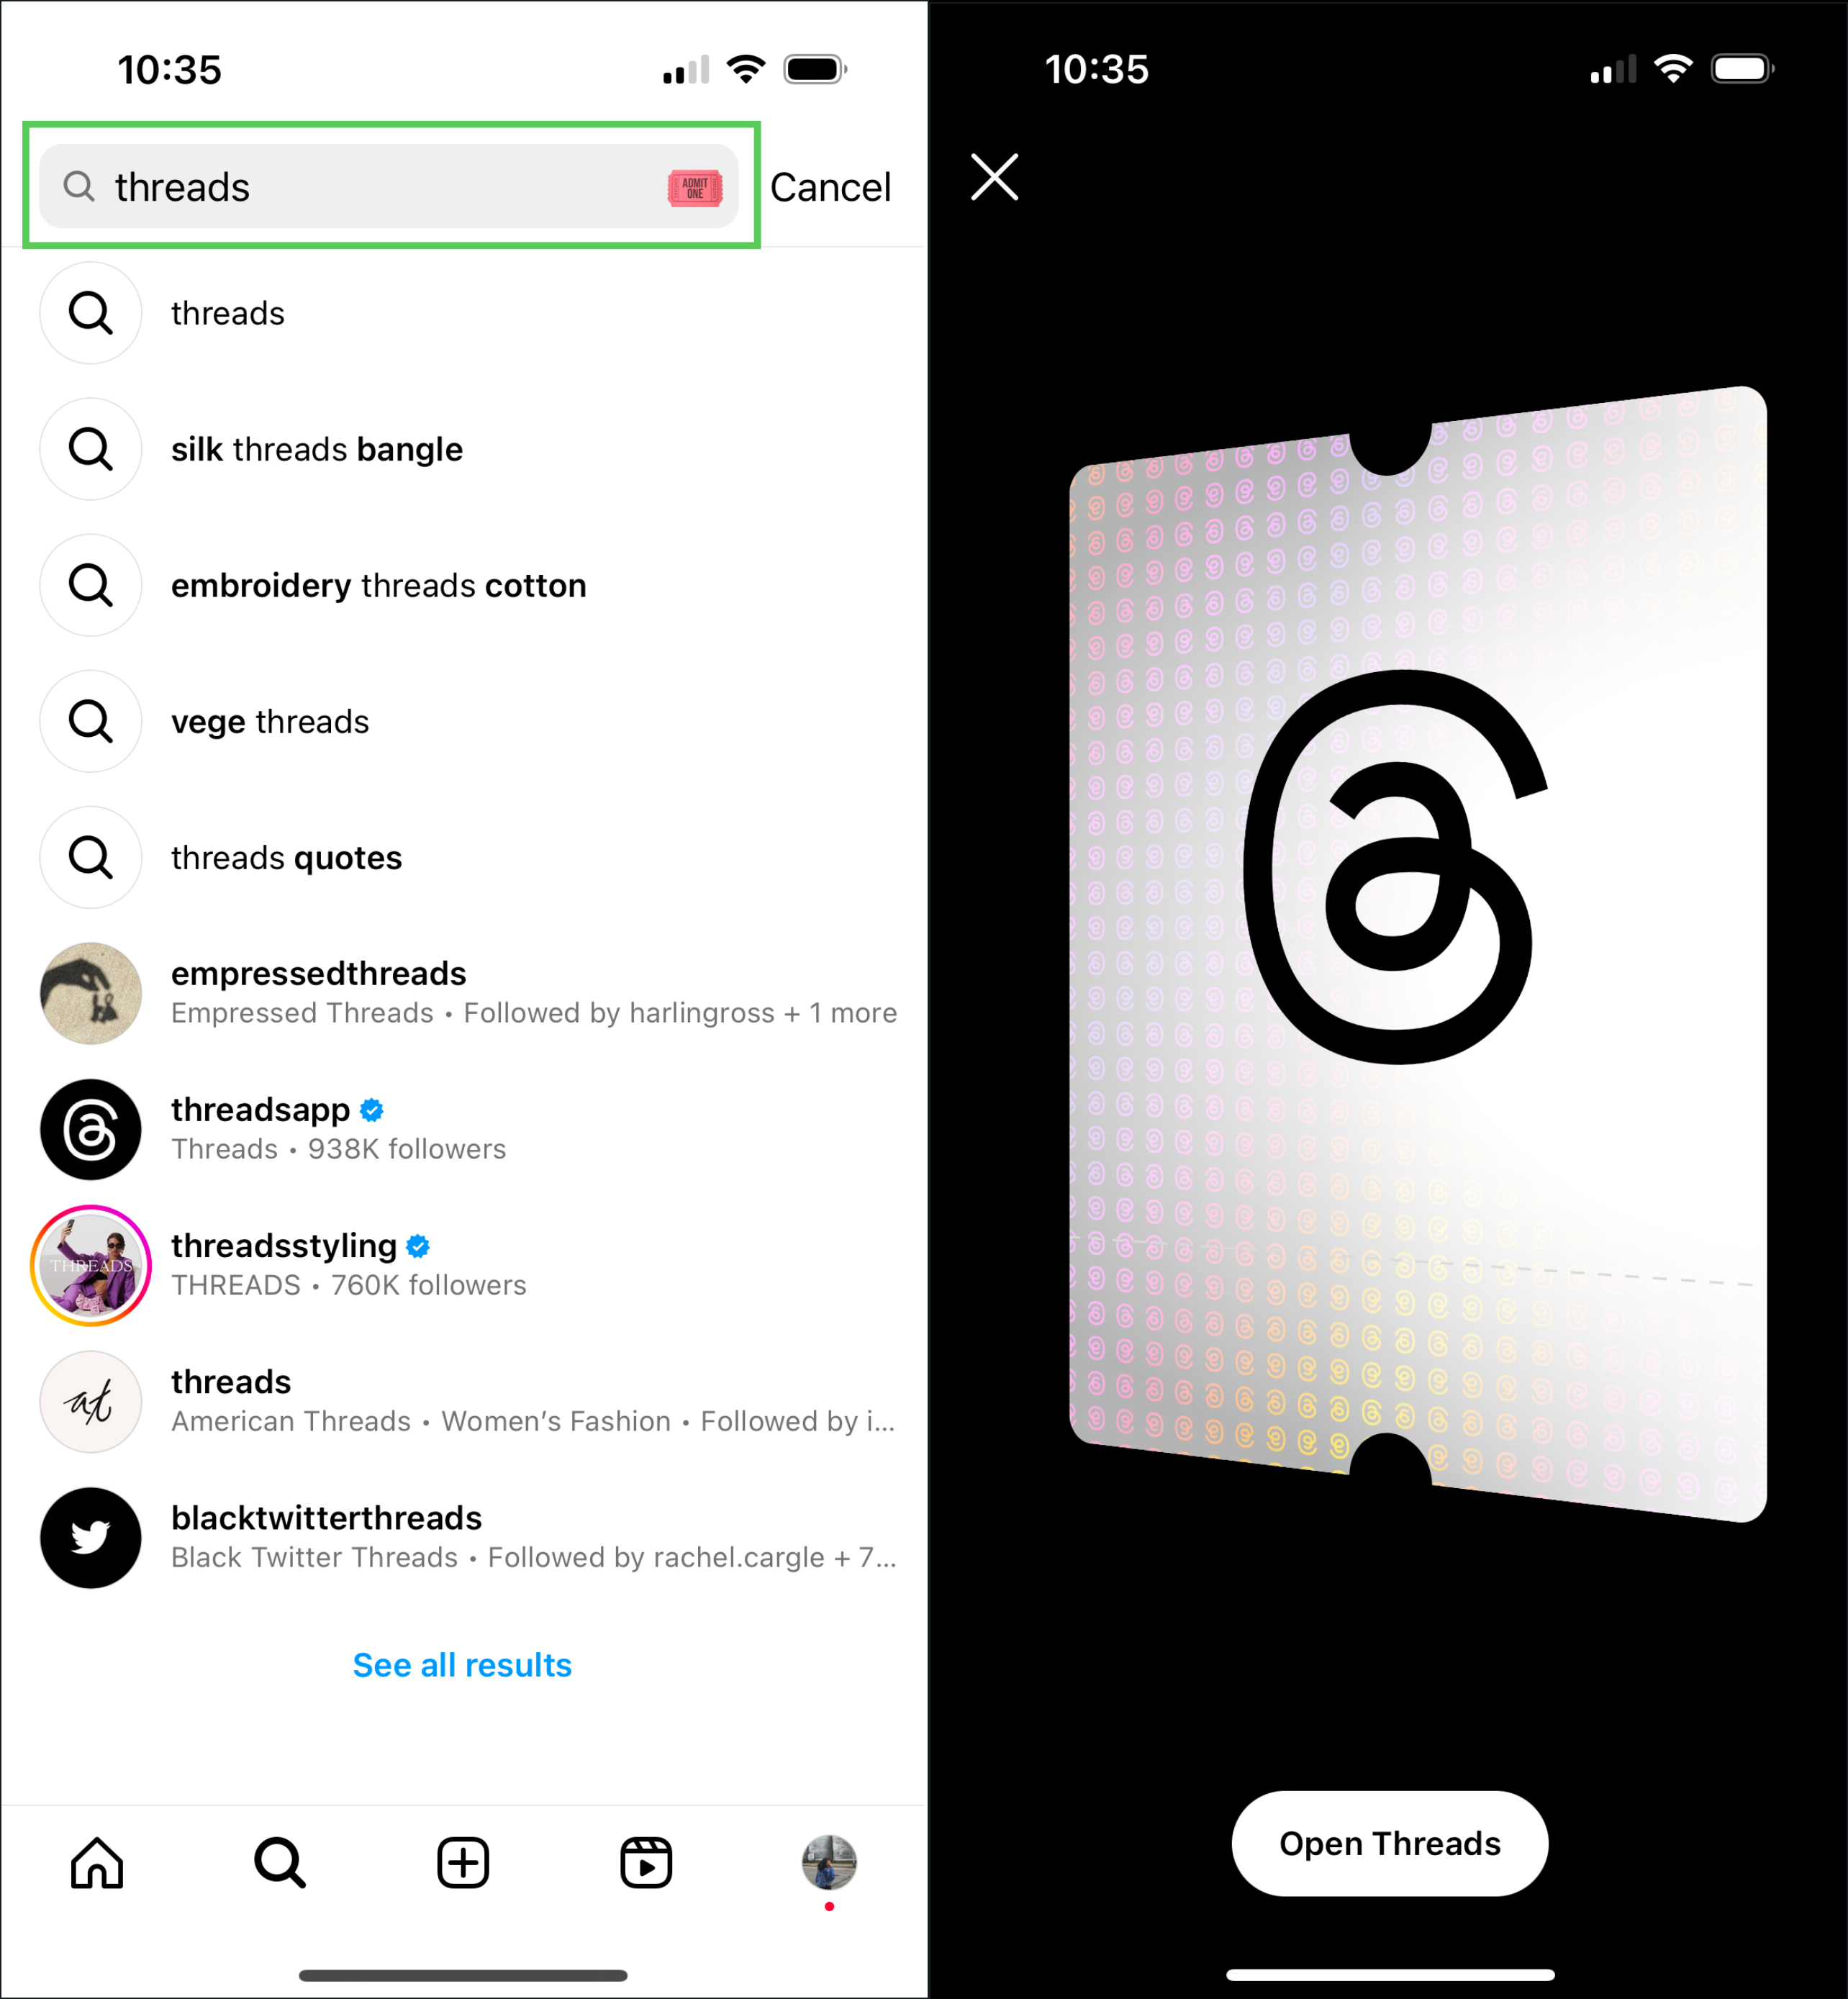 Two screenshots of the Threads sign up experience in the Instagram app. The first is a screenshot of the Instagram search tab, with the word “Threads” in the search bar. An admit one ticket icon is shown in the right side of the search bar. The second screenshot shows a black screen with a white pass featuring the Threads logo. At the bottom of the screen, there’s a button that says, “Open Threads”.